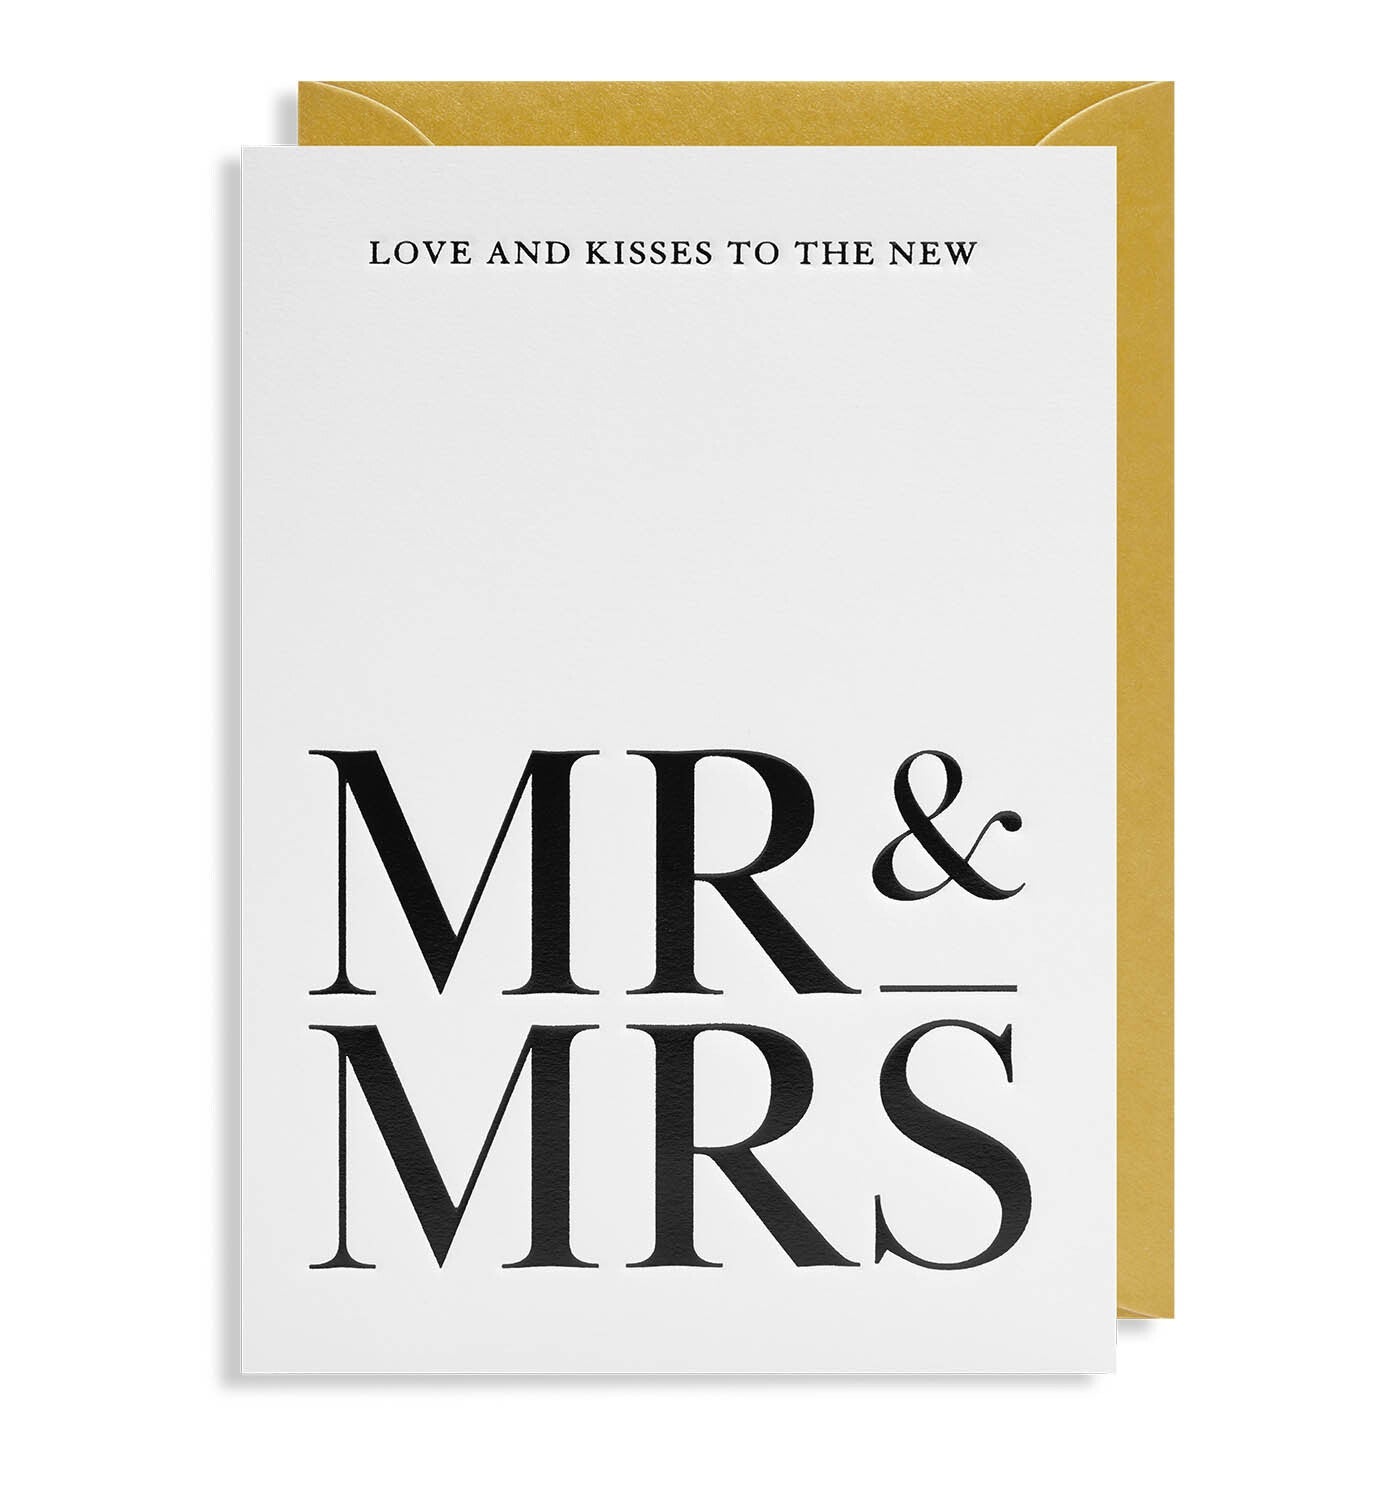 Love And Kisses to the New Mr & Mrs Card